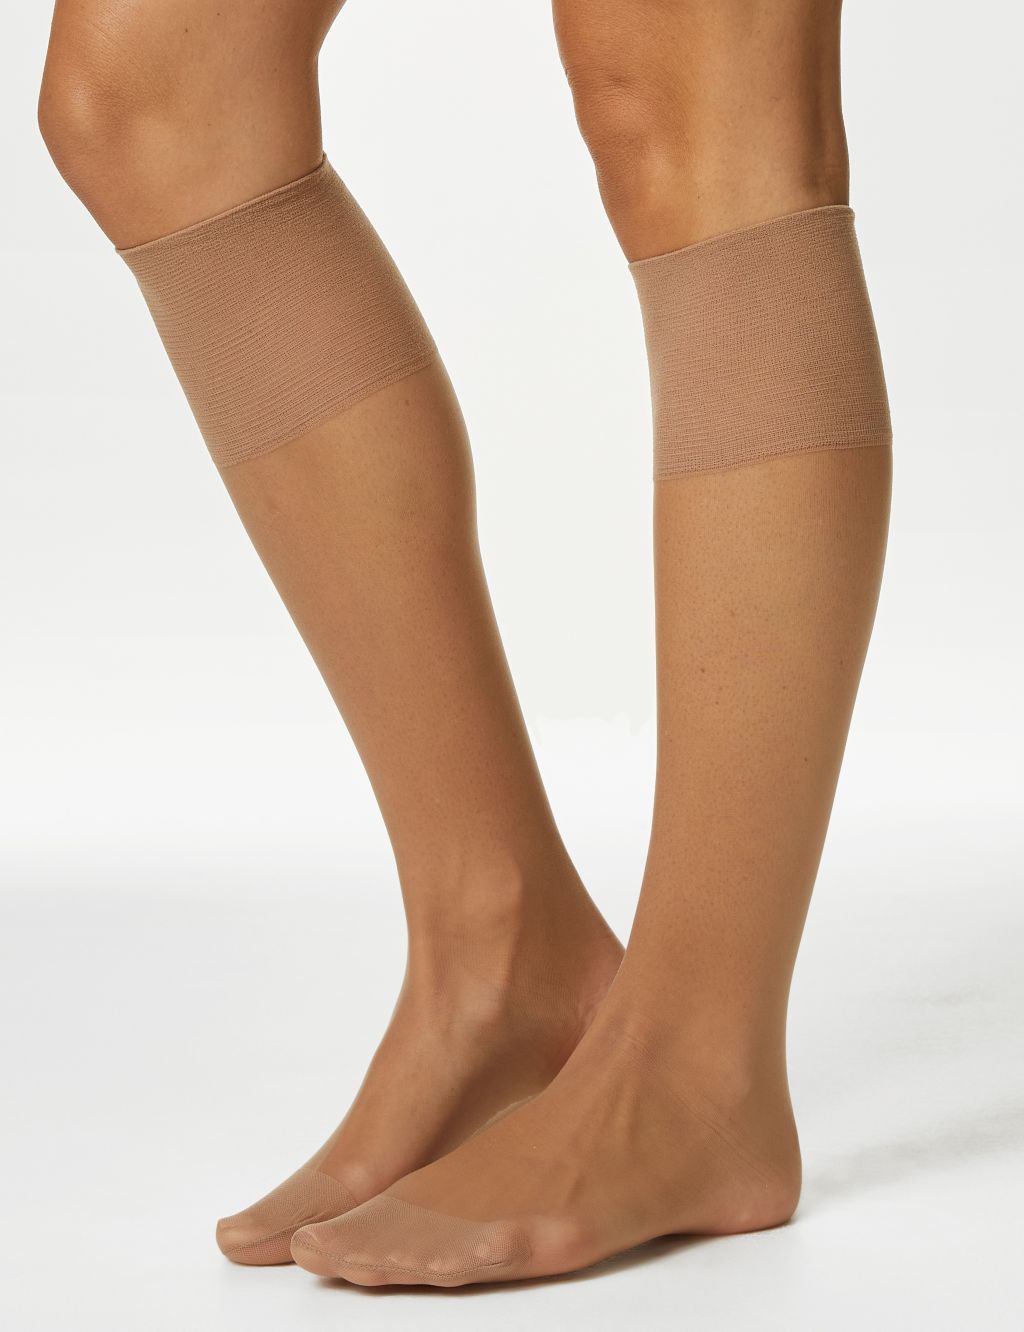 Scholl Softgrip Medium Support Class II Compression Stockings for Women -  Below The Knee, Open Toe - Natural, Extra Large. Treatment for Varicose